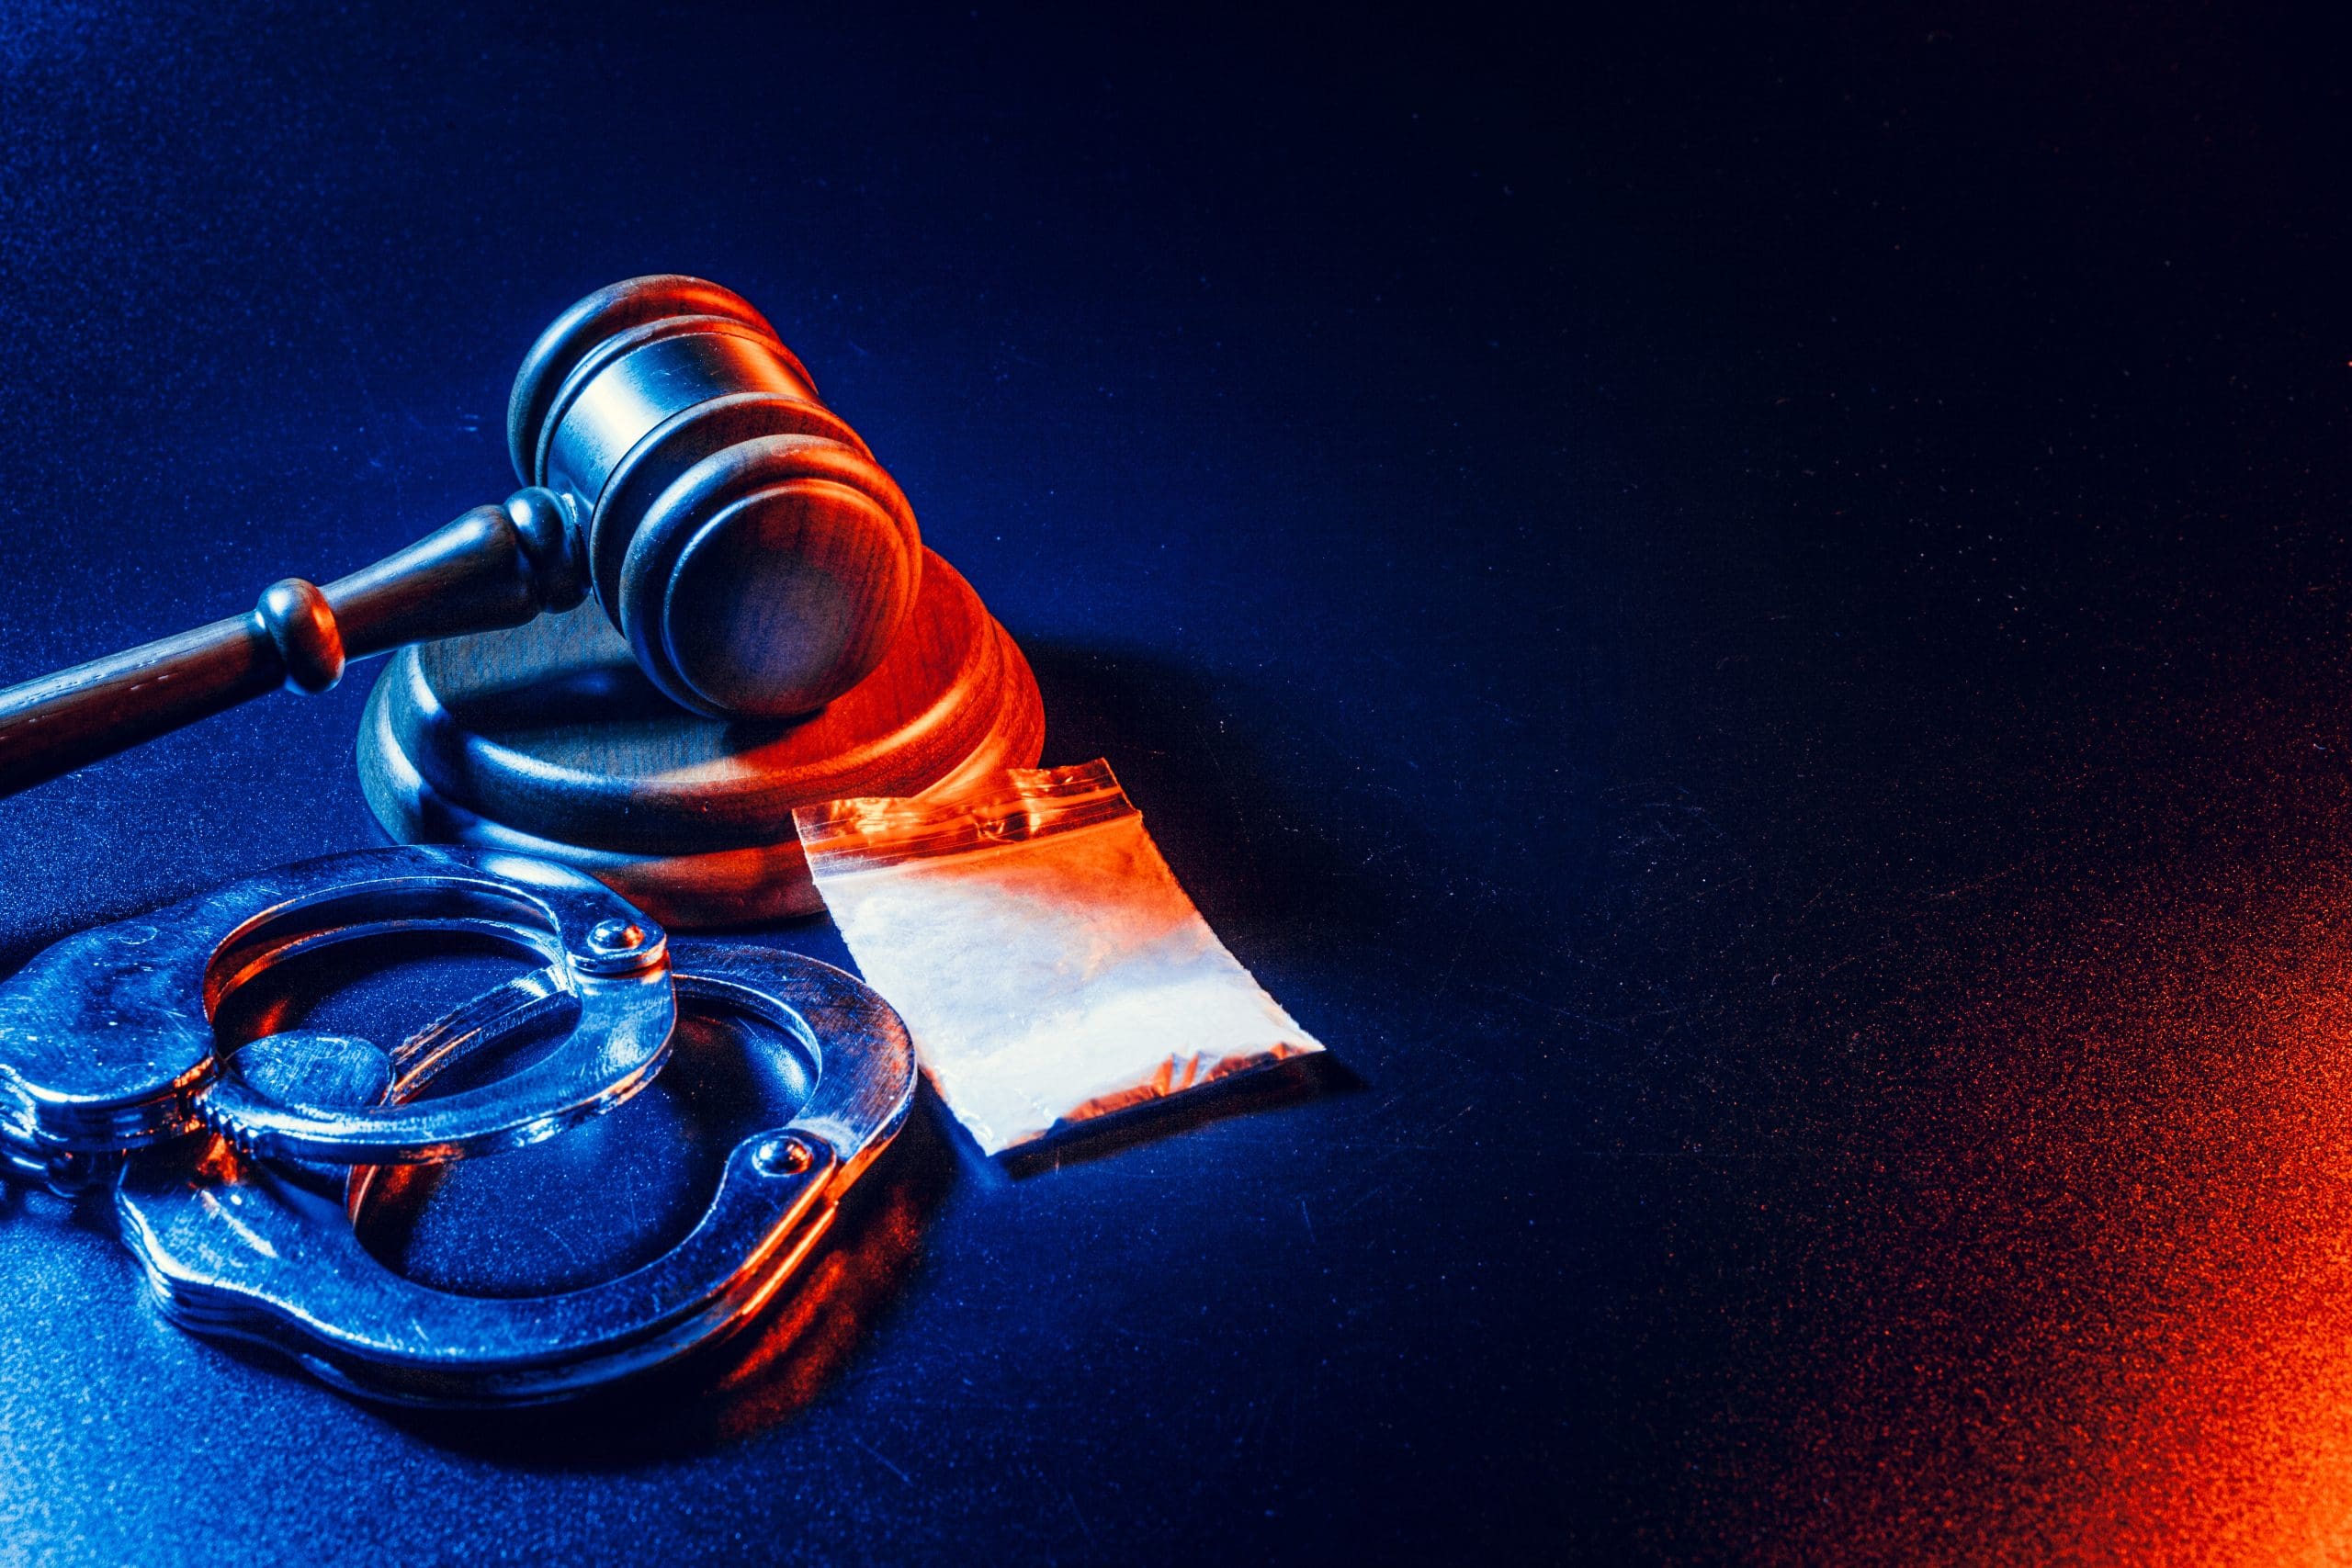 A gavel and handcuffs on a blue background.